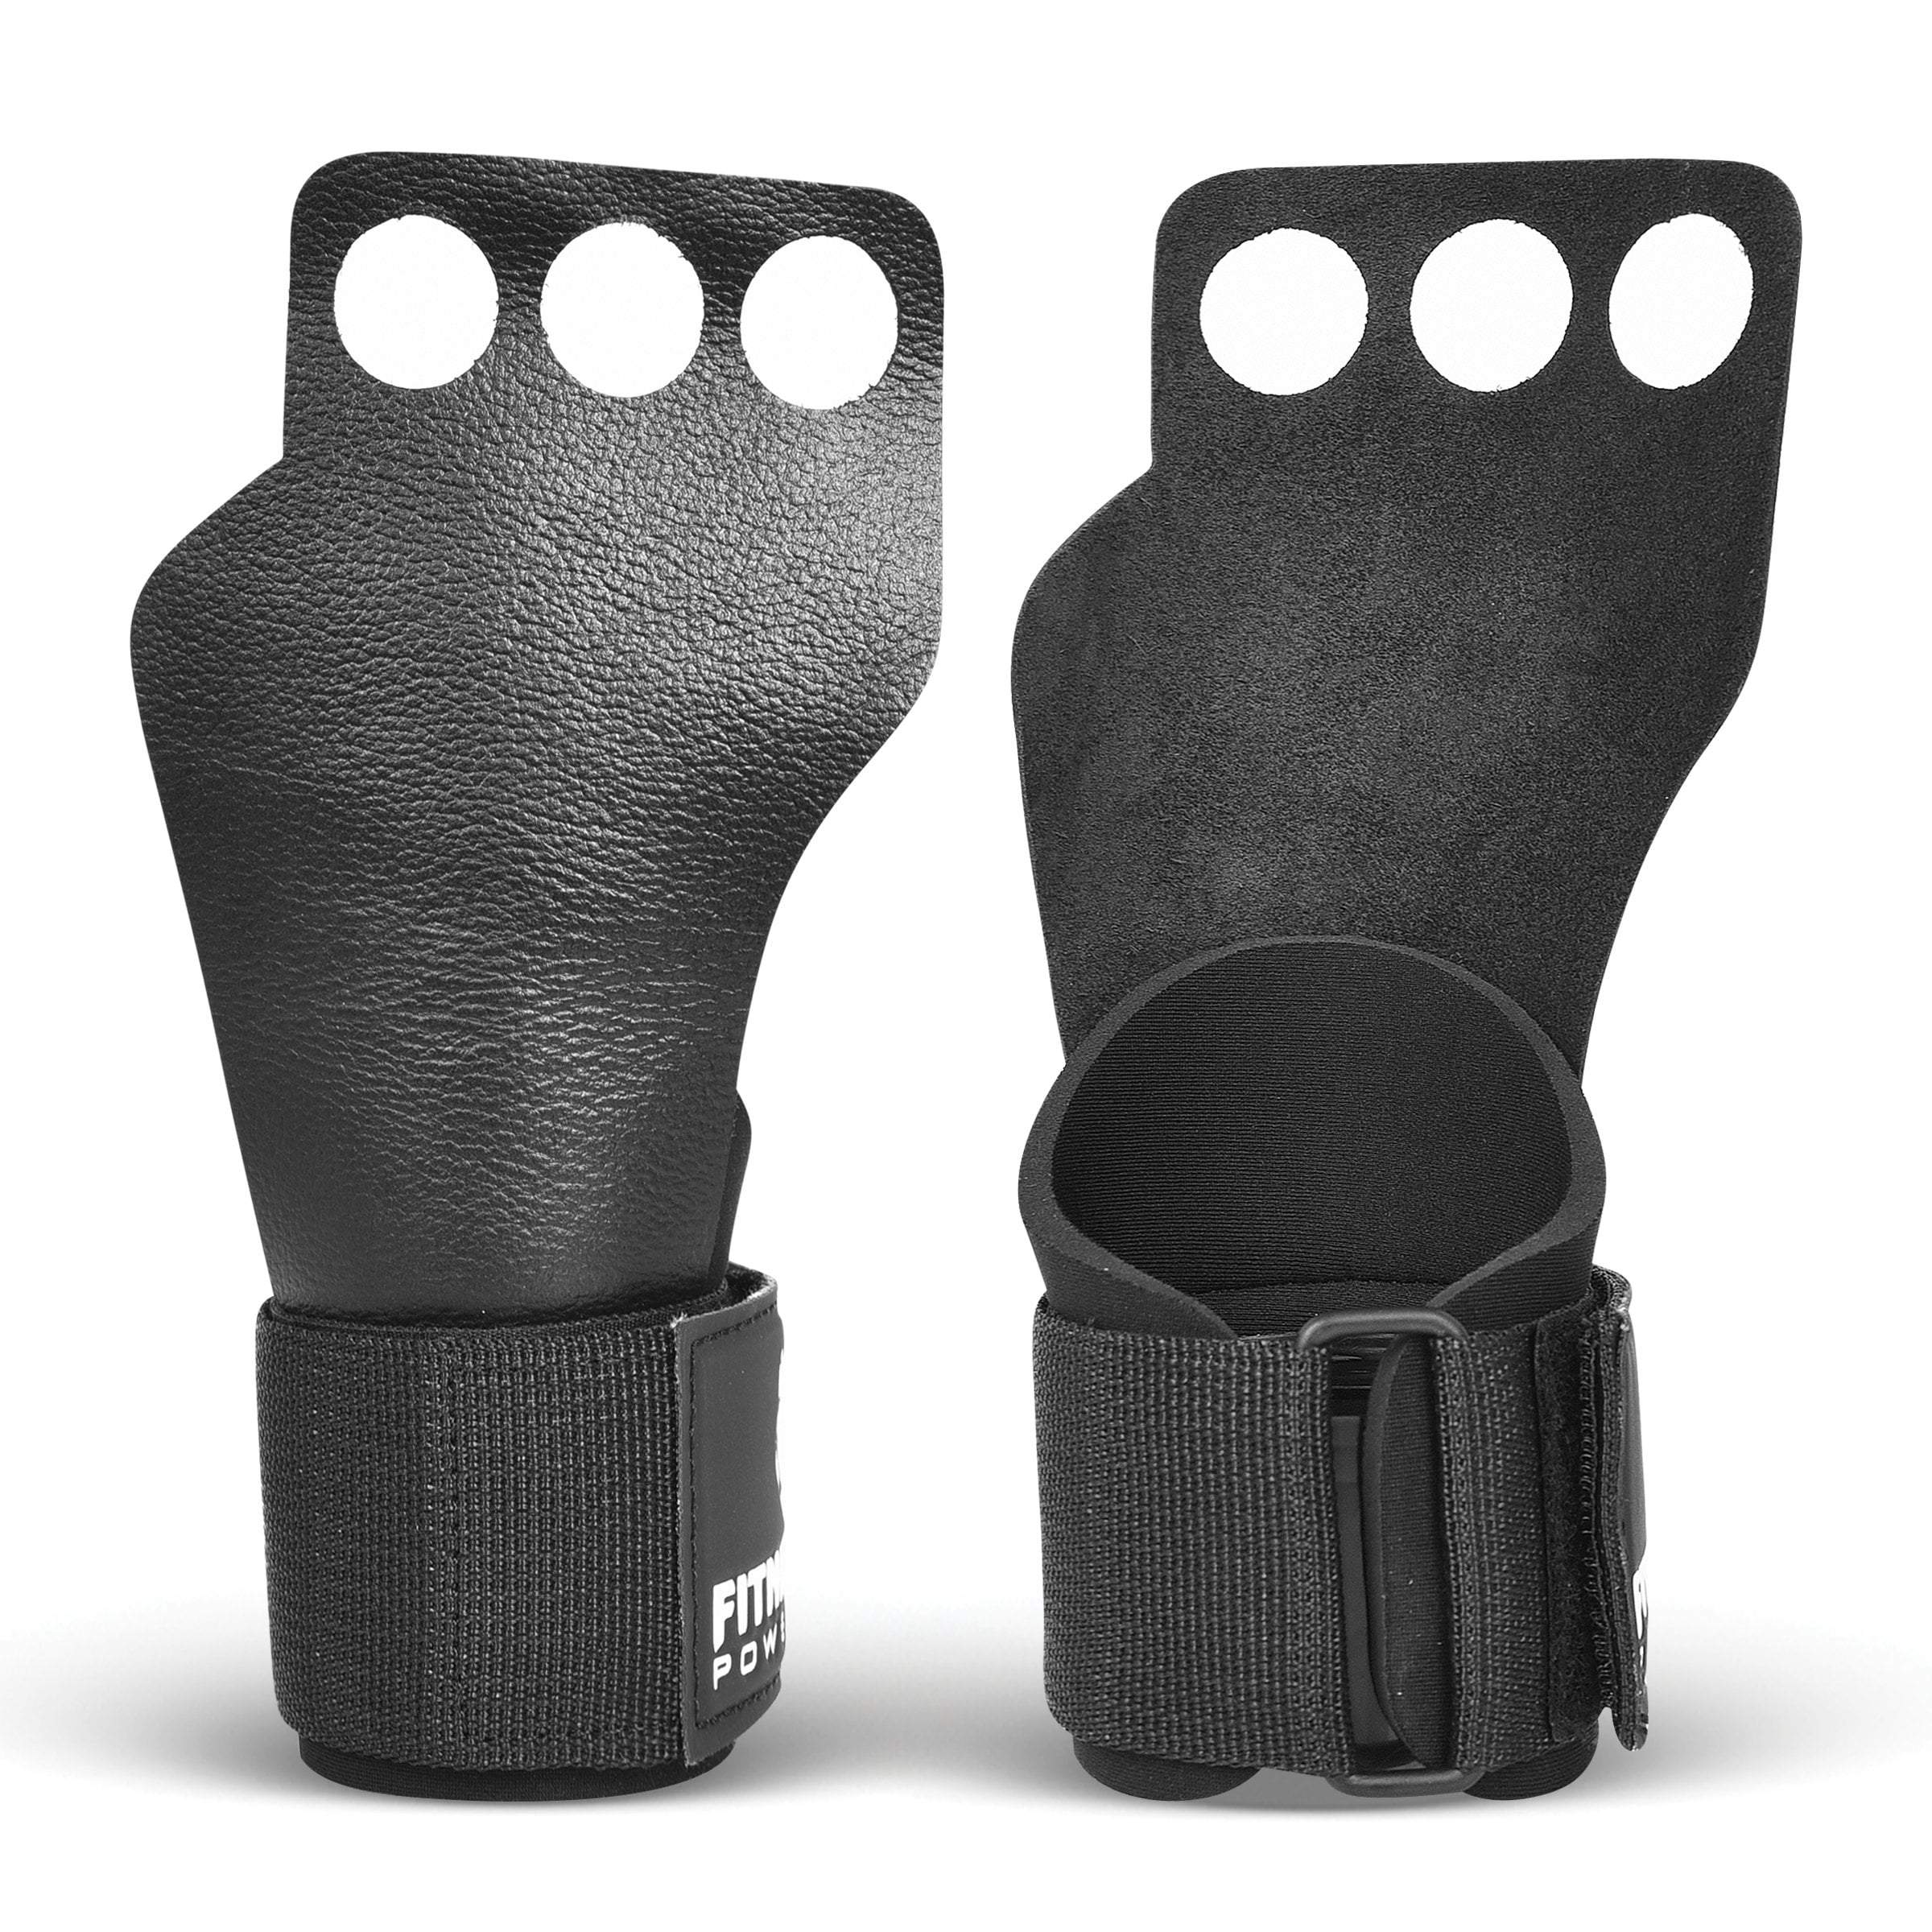 FITNESS FOX 3 Hole Leather Lifting Hand Grips for Weightlifting & Cross Training